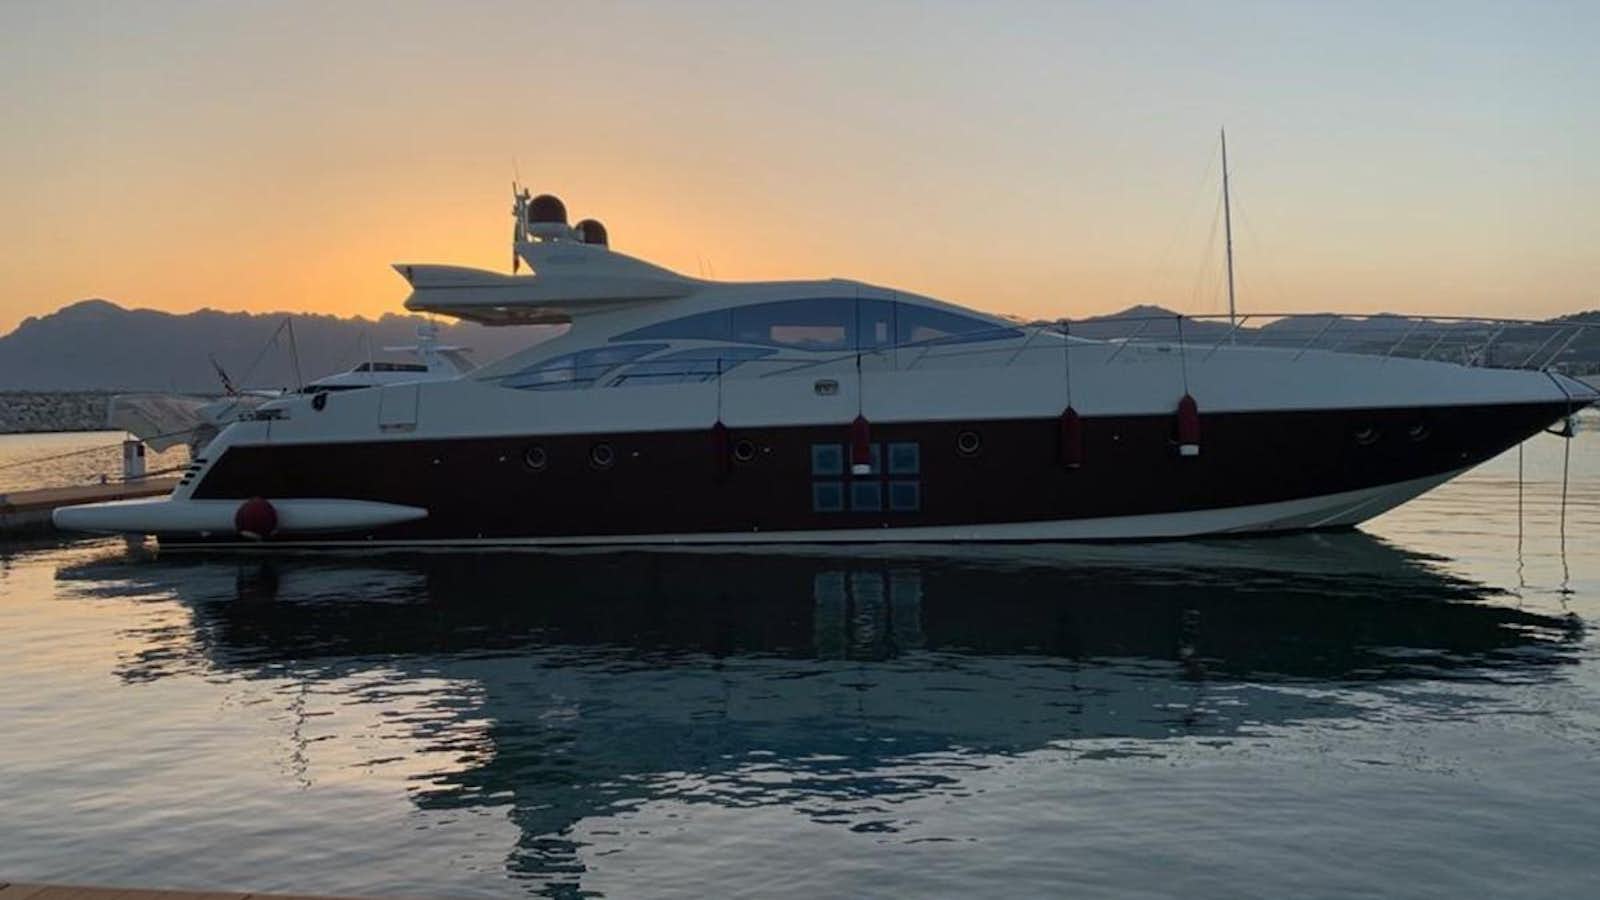 a boat on the water aboard MR LEO Yacht for Sale